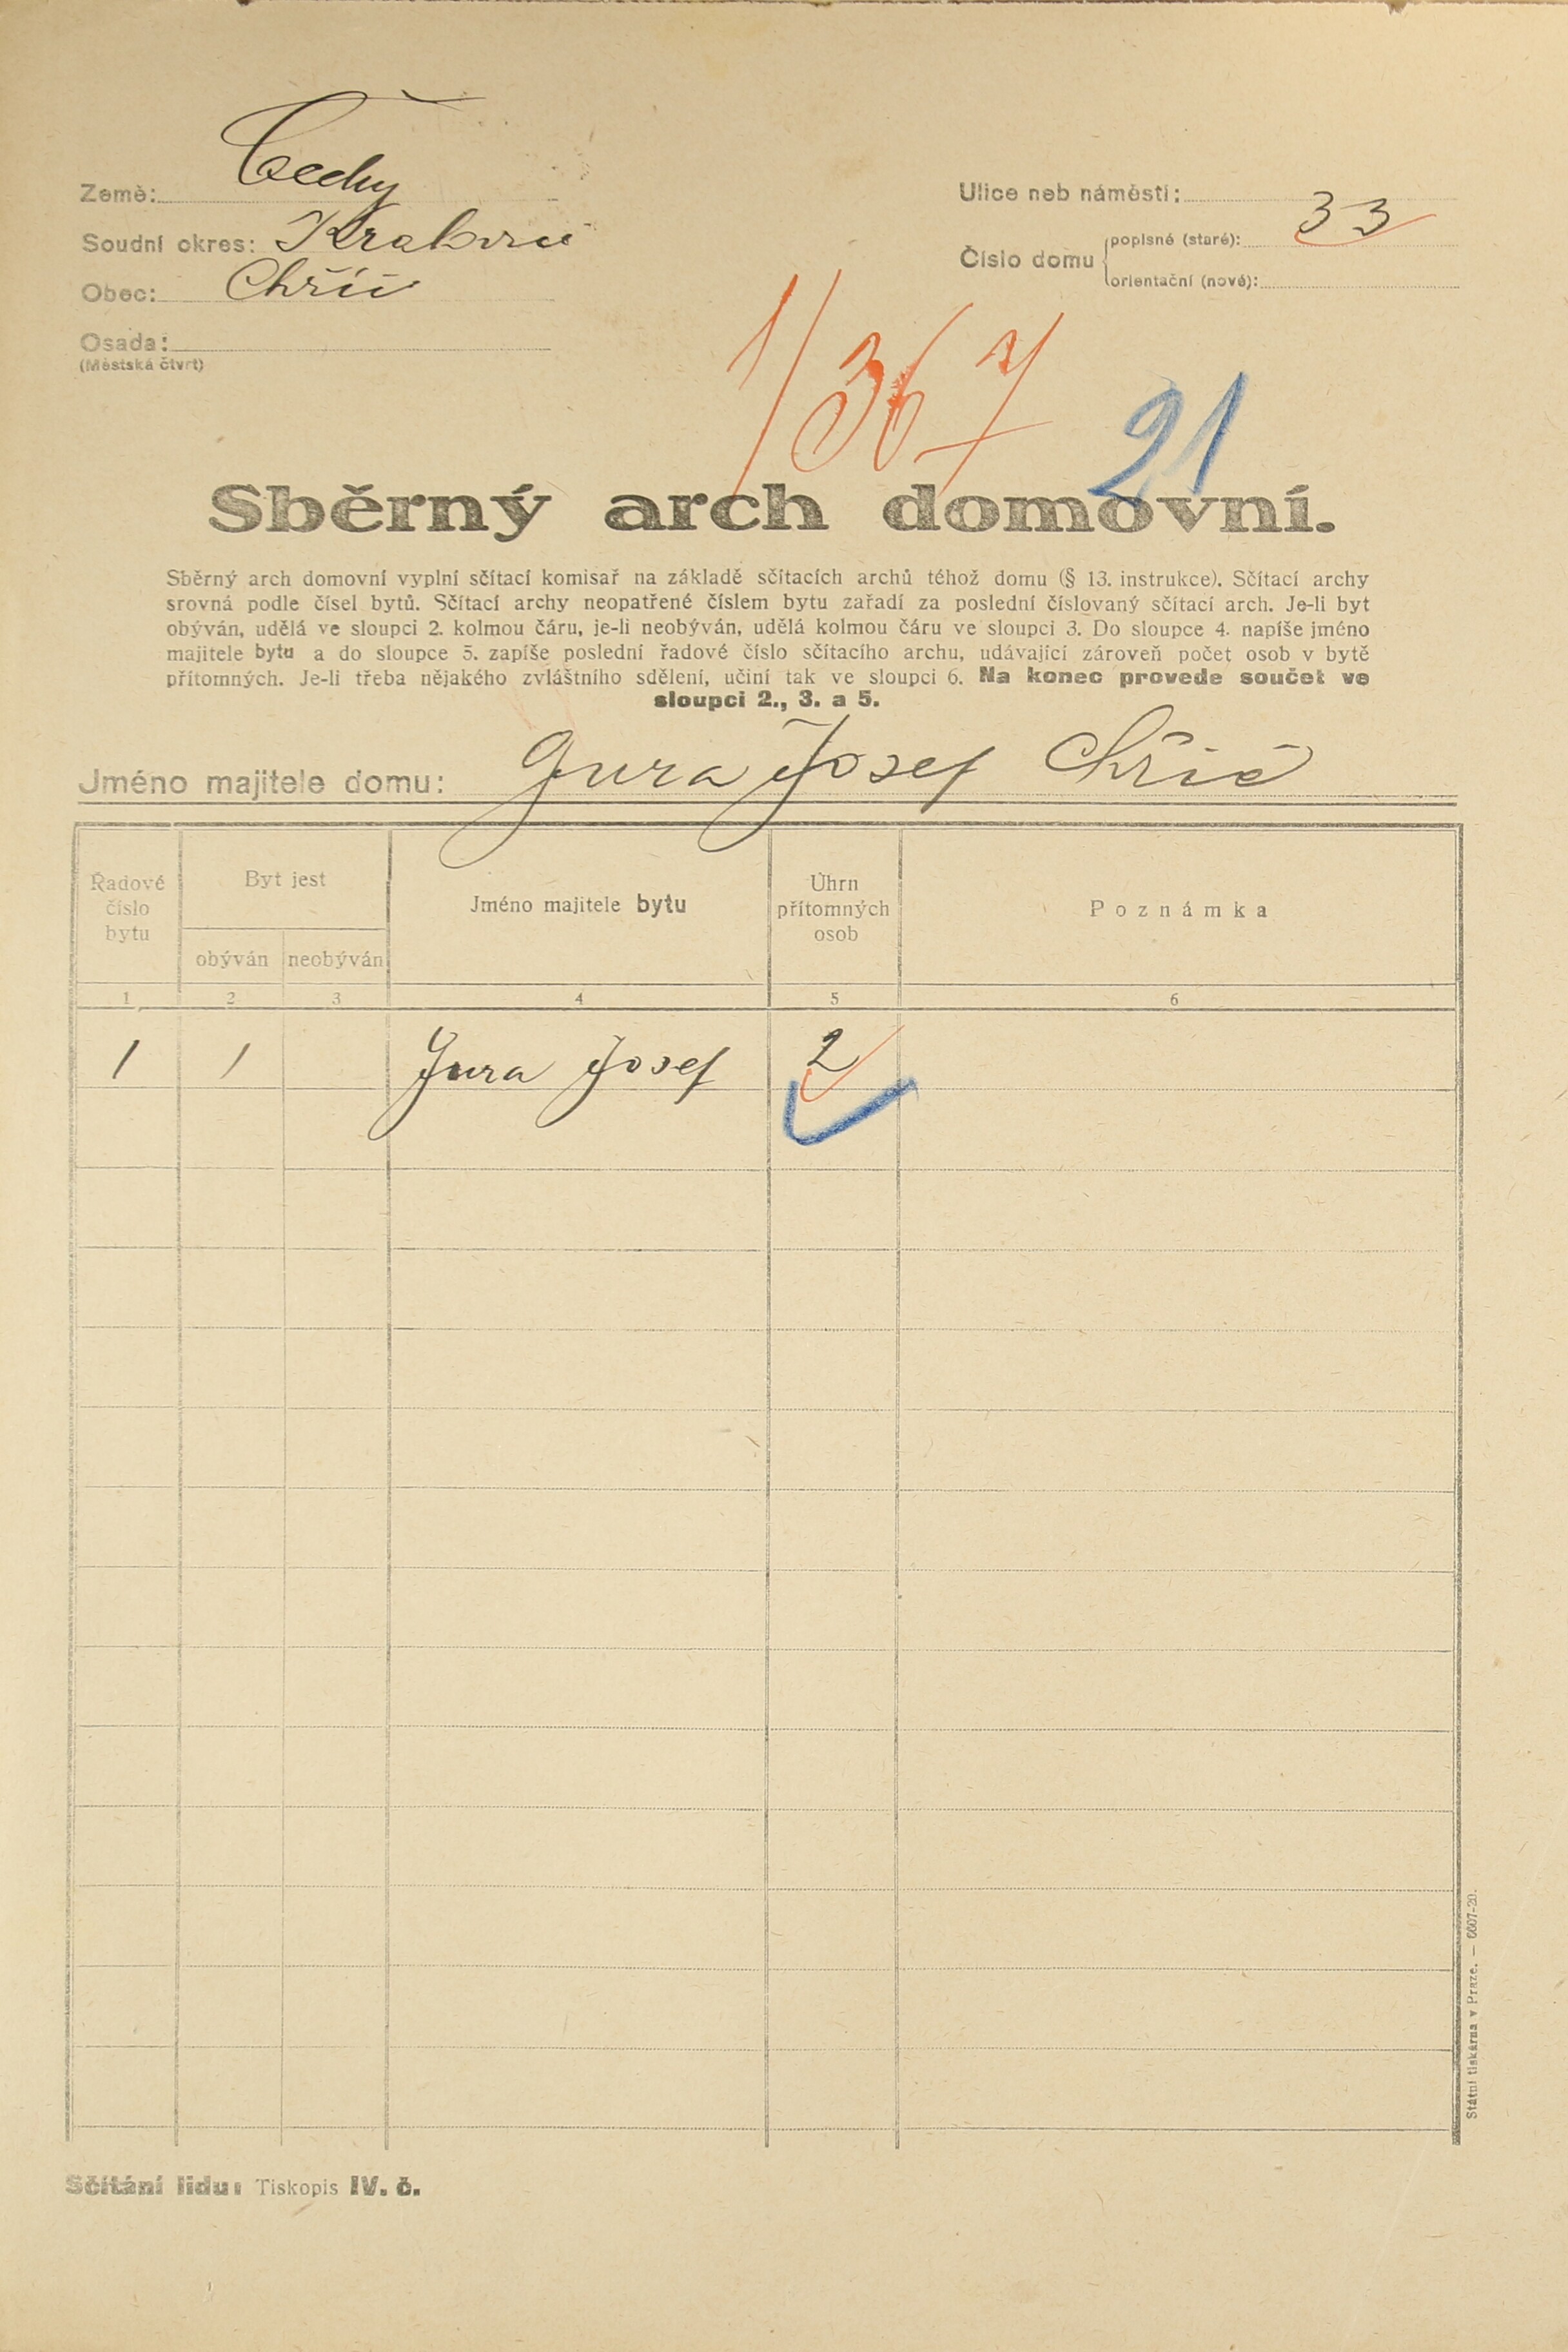 1. soap-ps_00423_census-1921-chric-cp033_0010